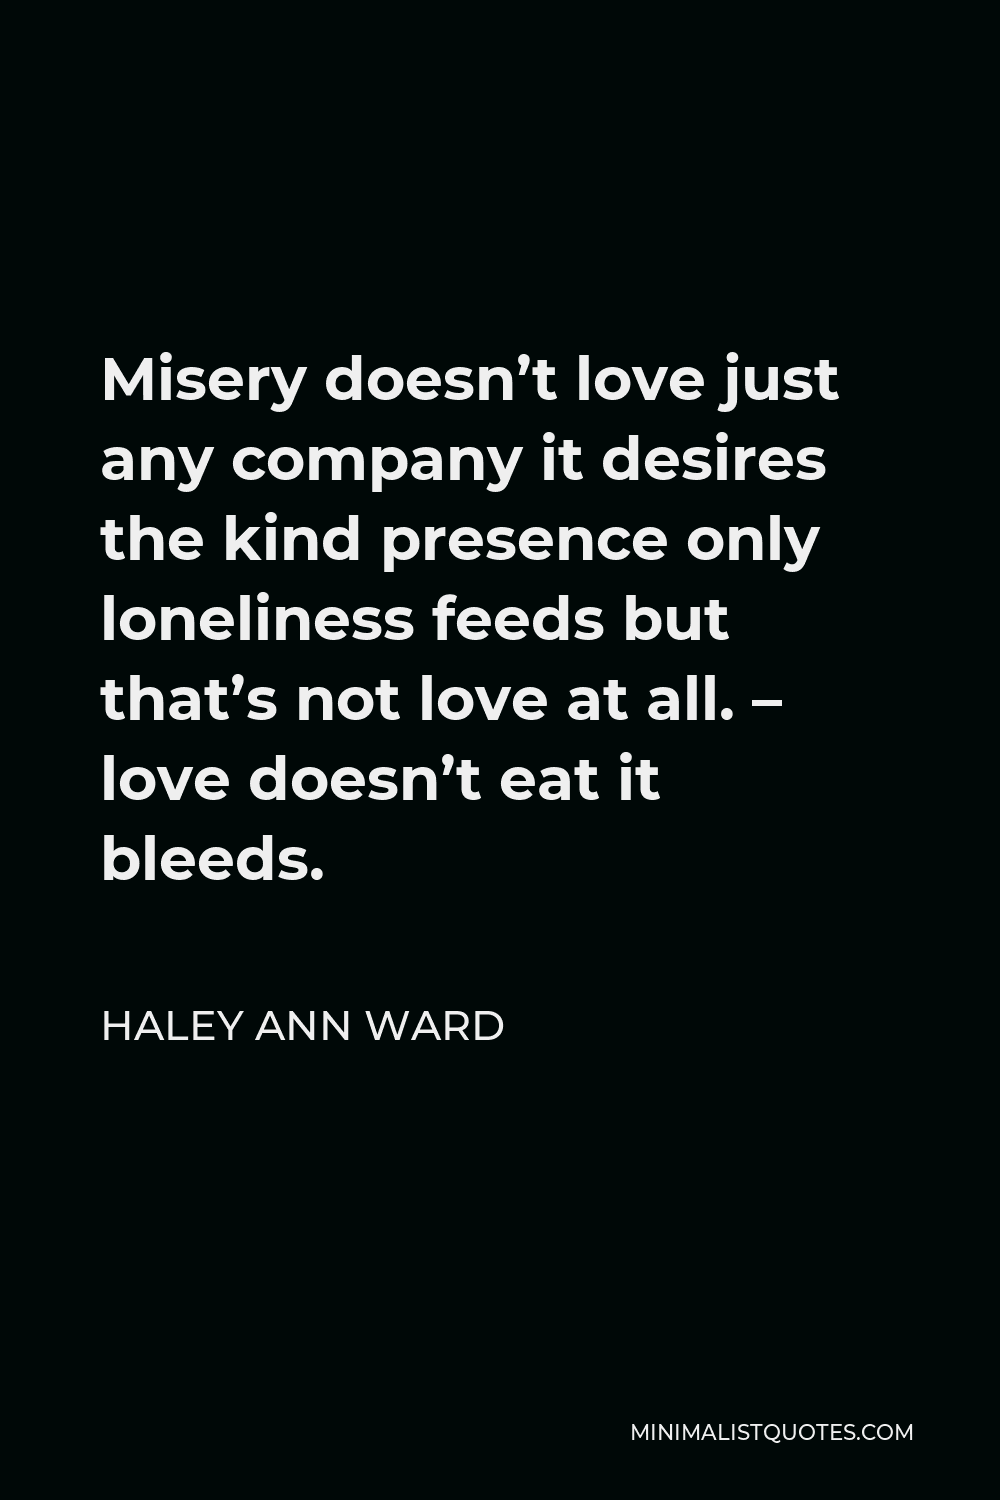 Haley Ann Ward Quote - Misery doesn’t love just any company it desires the kind presence only loneliness feeds but that’s not love at all. – love doesn’t eat it bleeds.